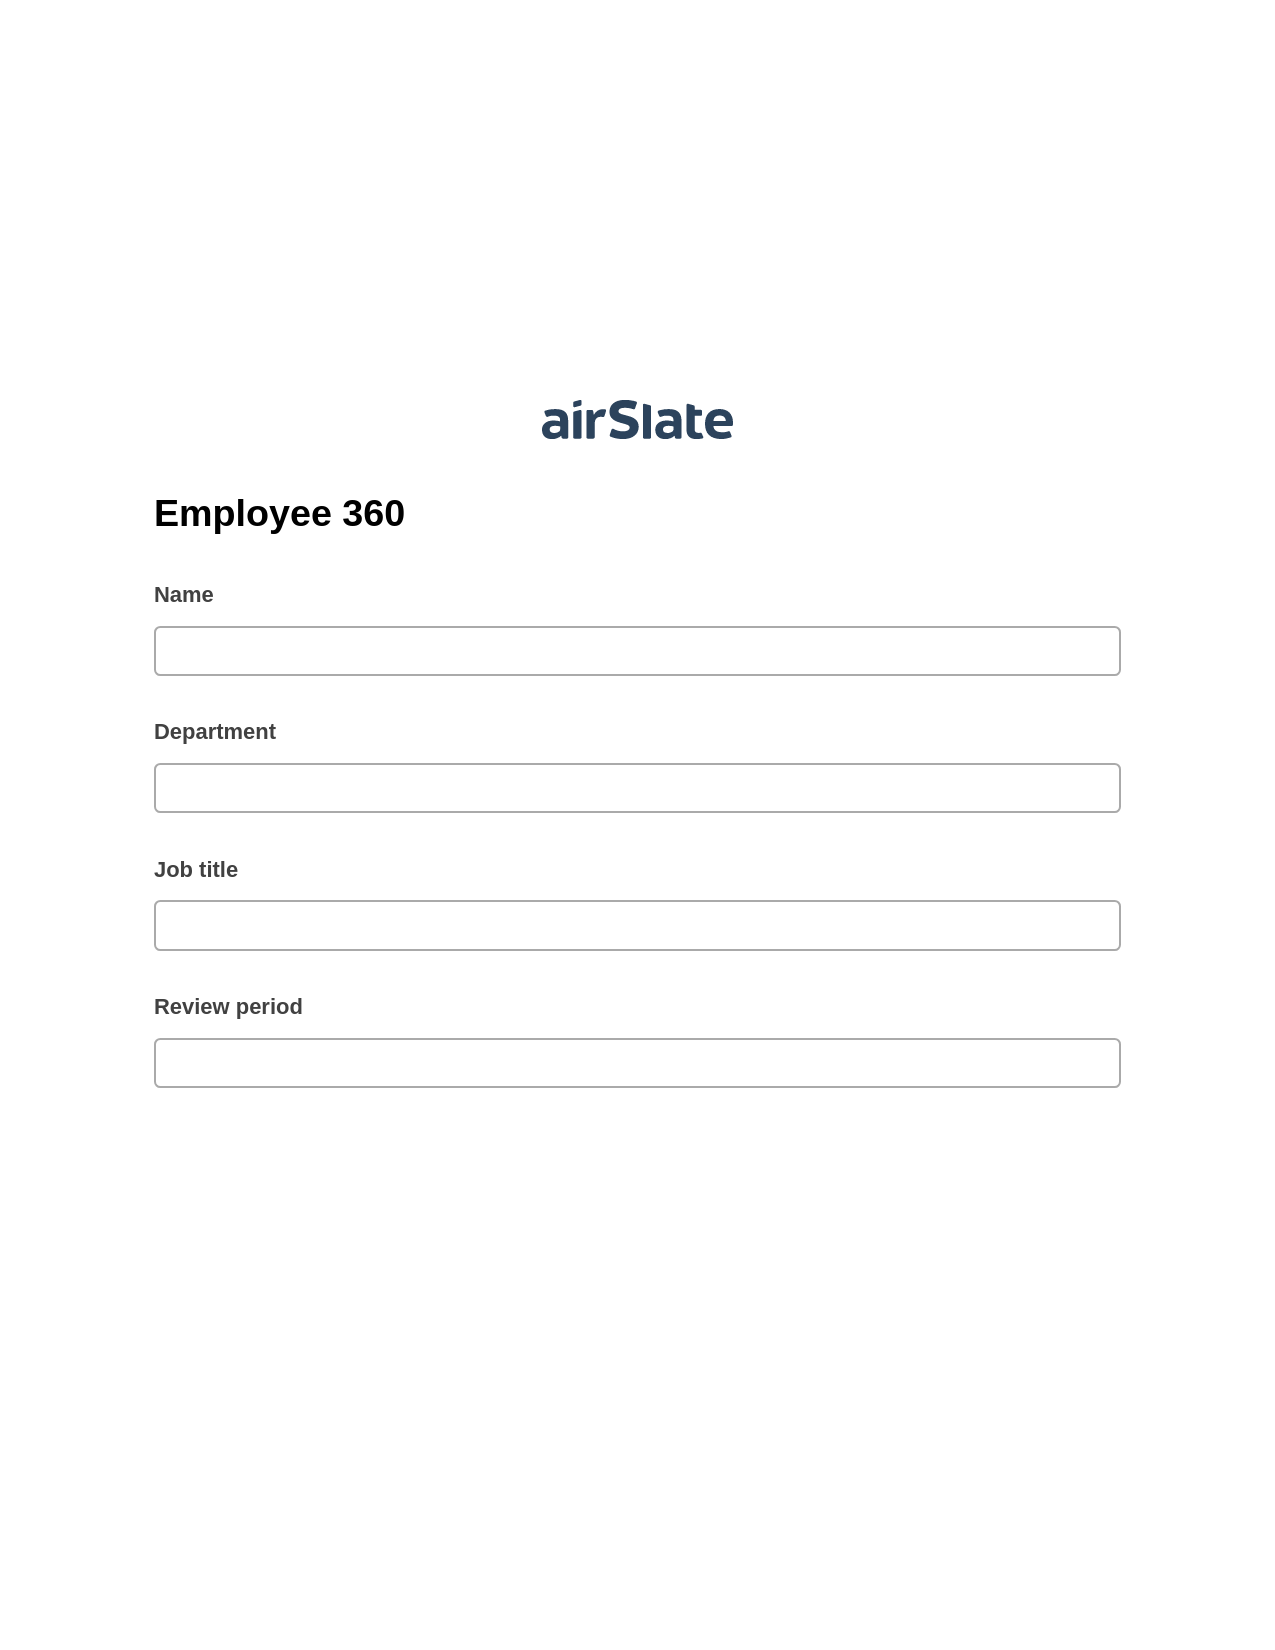 Employee 360 Pre-fill from CSV File Bot, Update MS Dynamics 365 Record Bot, Export to NetSuite Bot